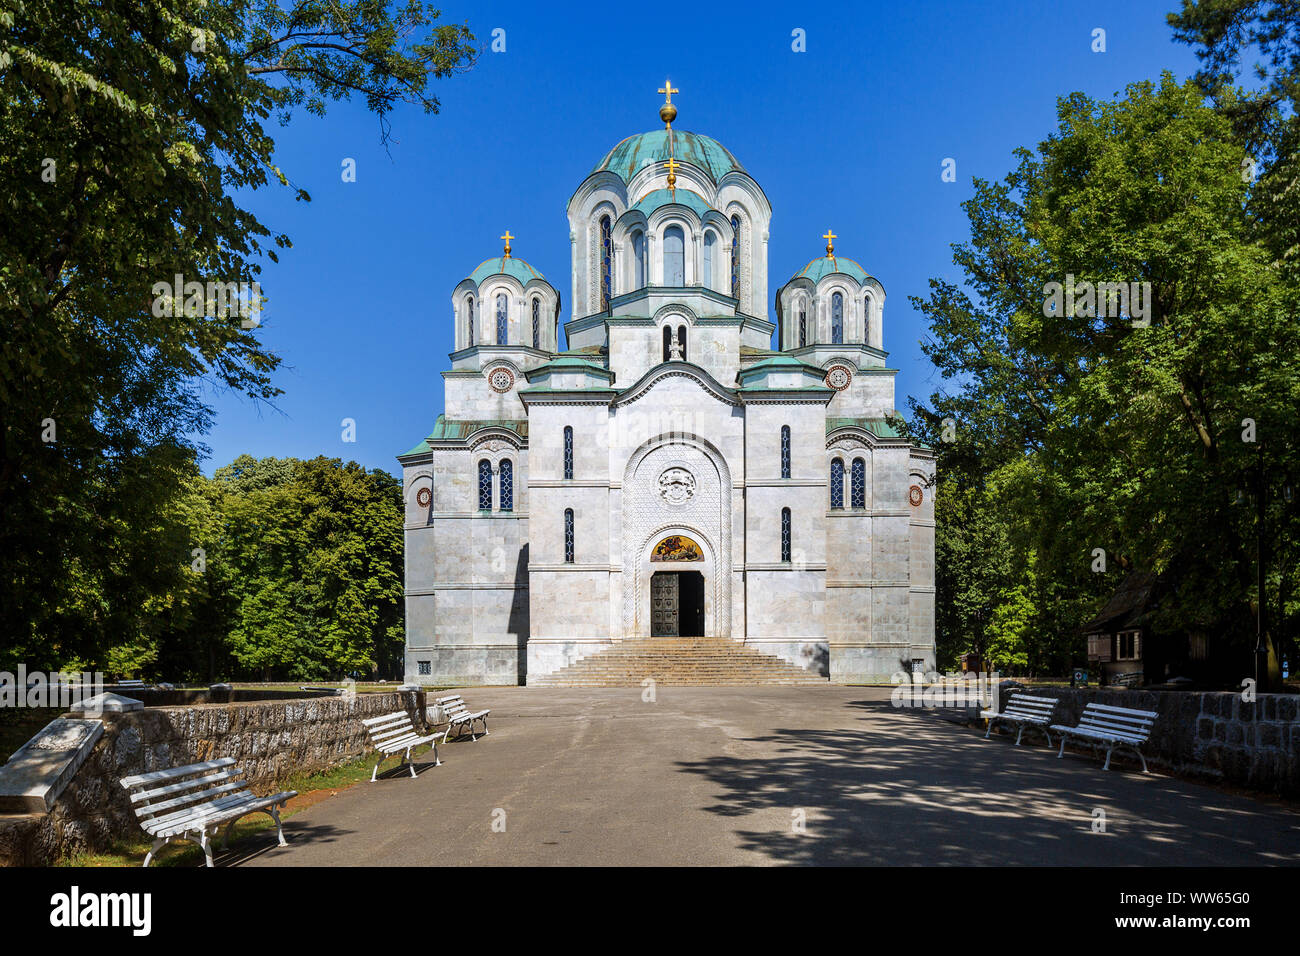 St George's Church on the Oplenac Hill, Topola, Serbia Stock Photo